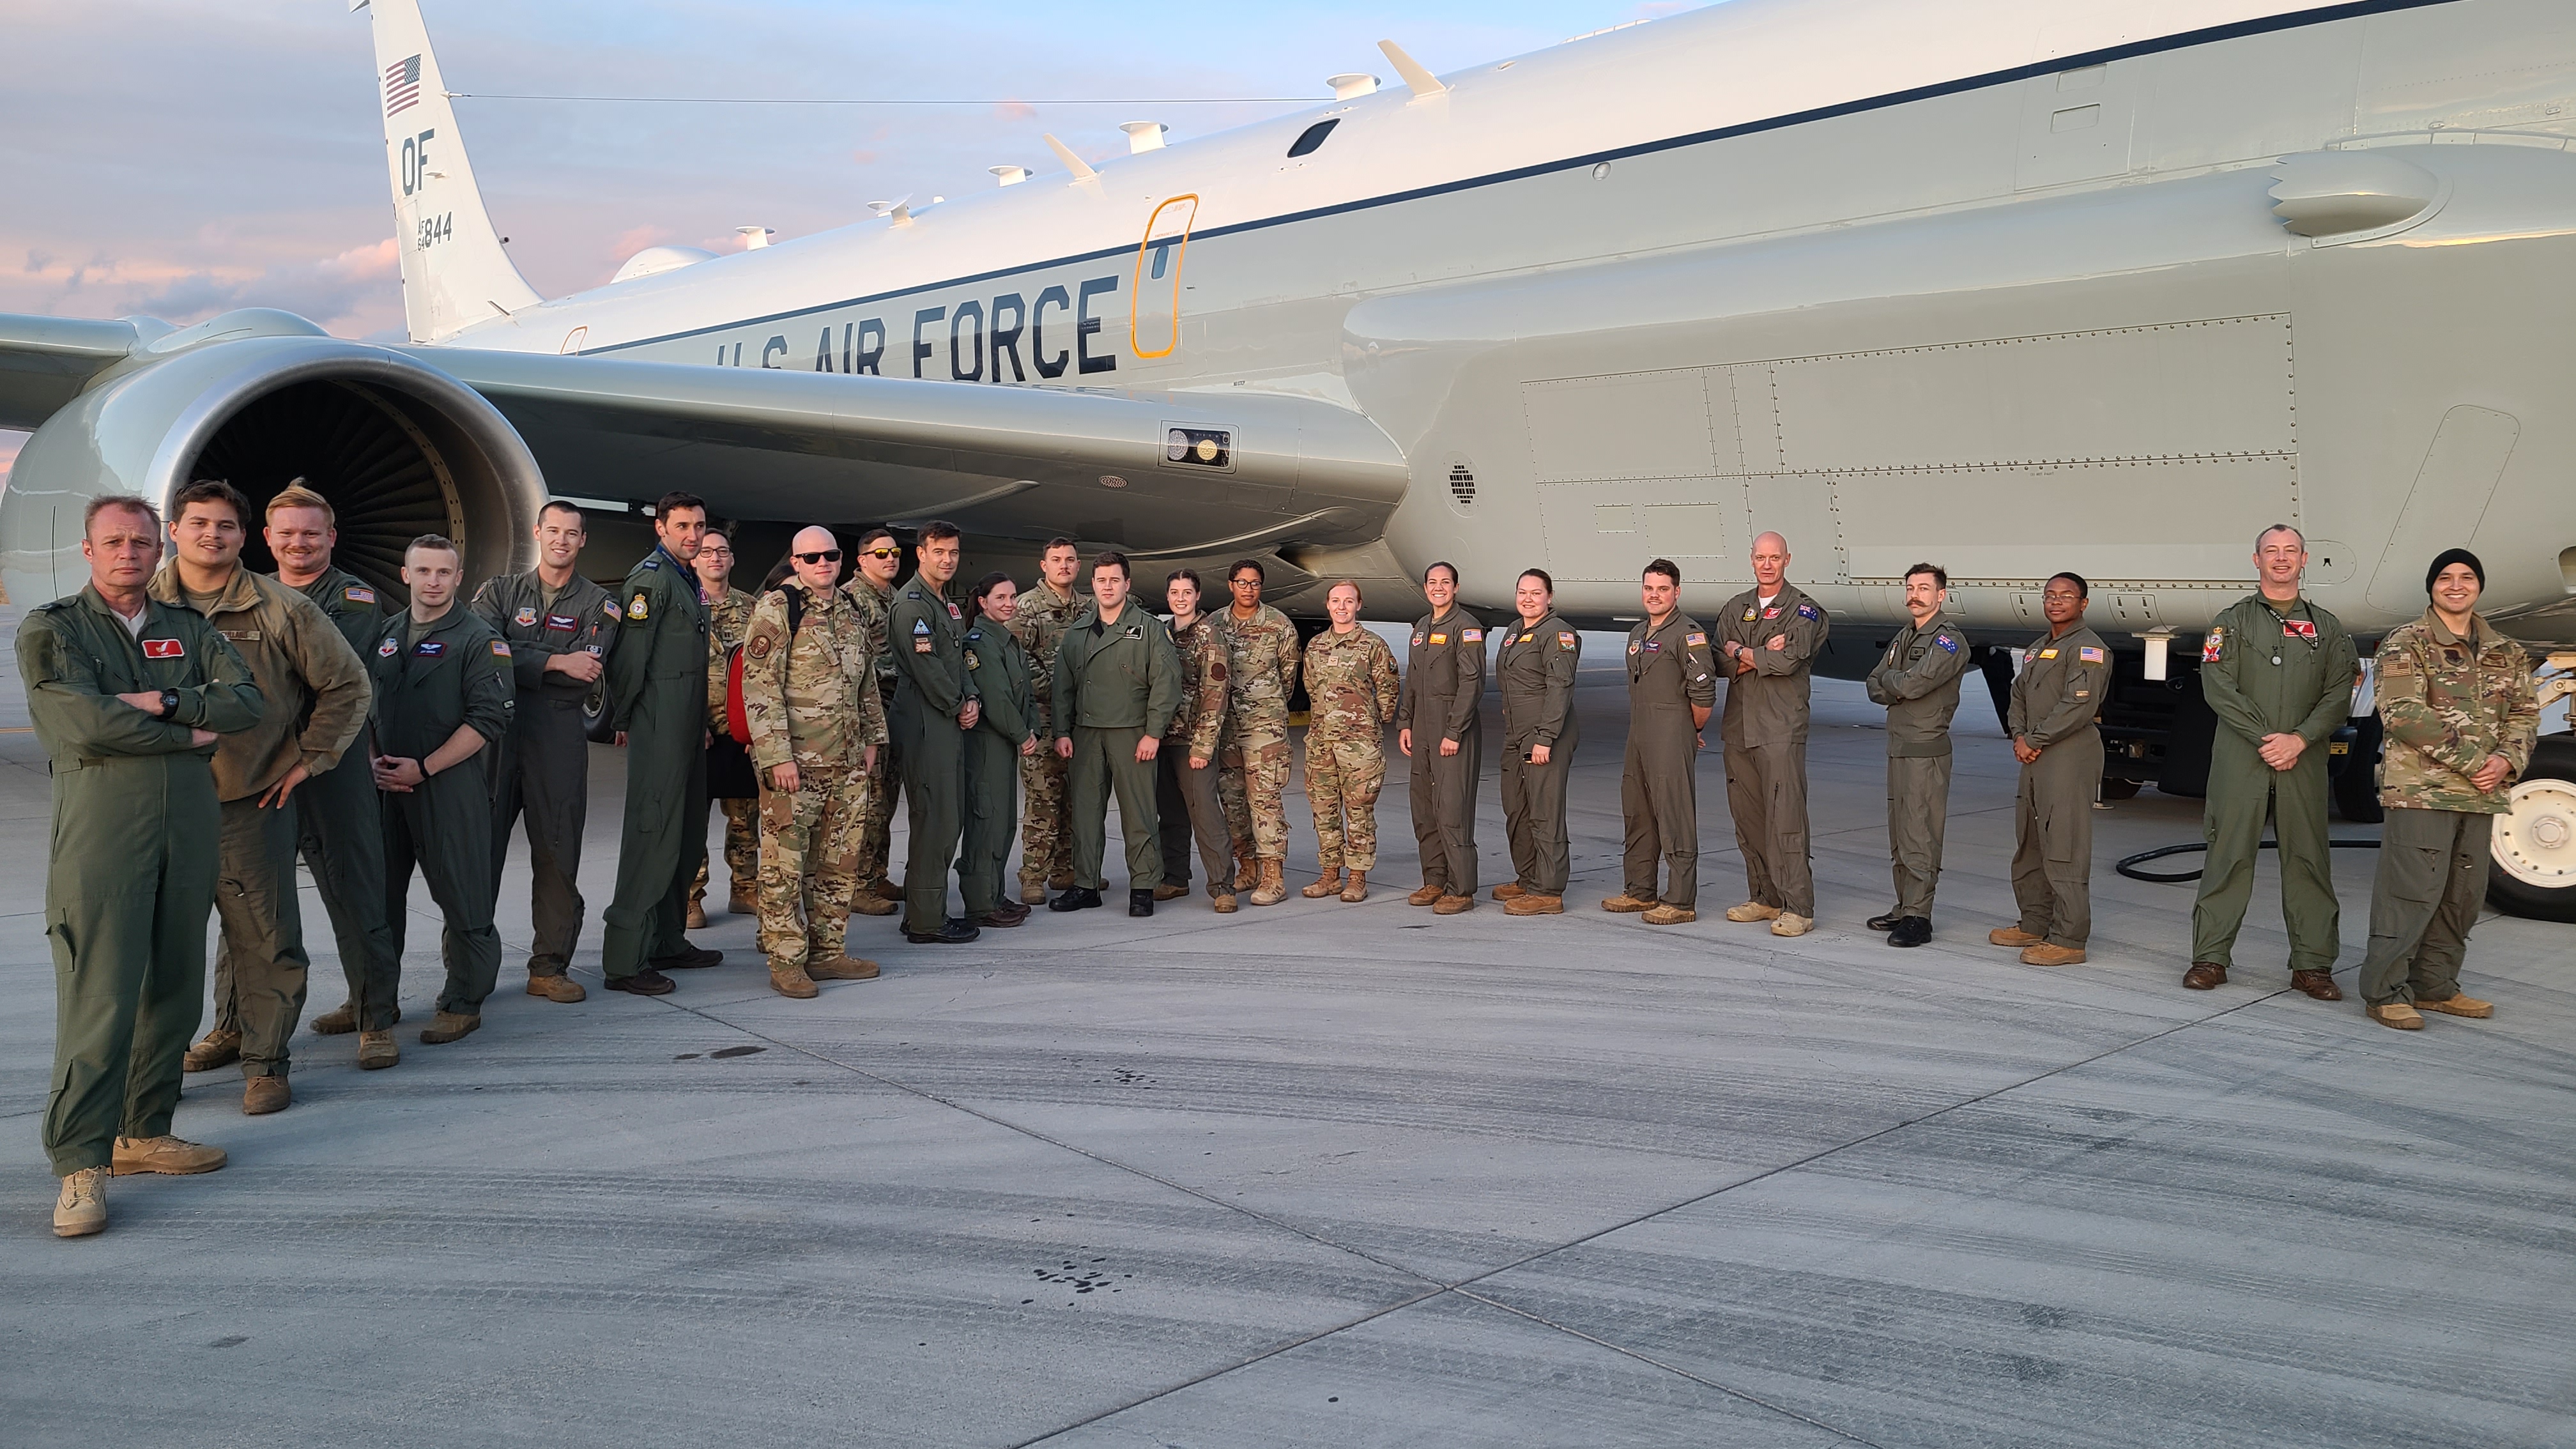 Images shows military personnel stood in front of a Rivet Joint aircraft.